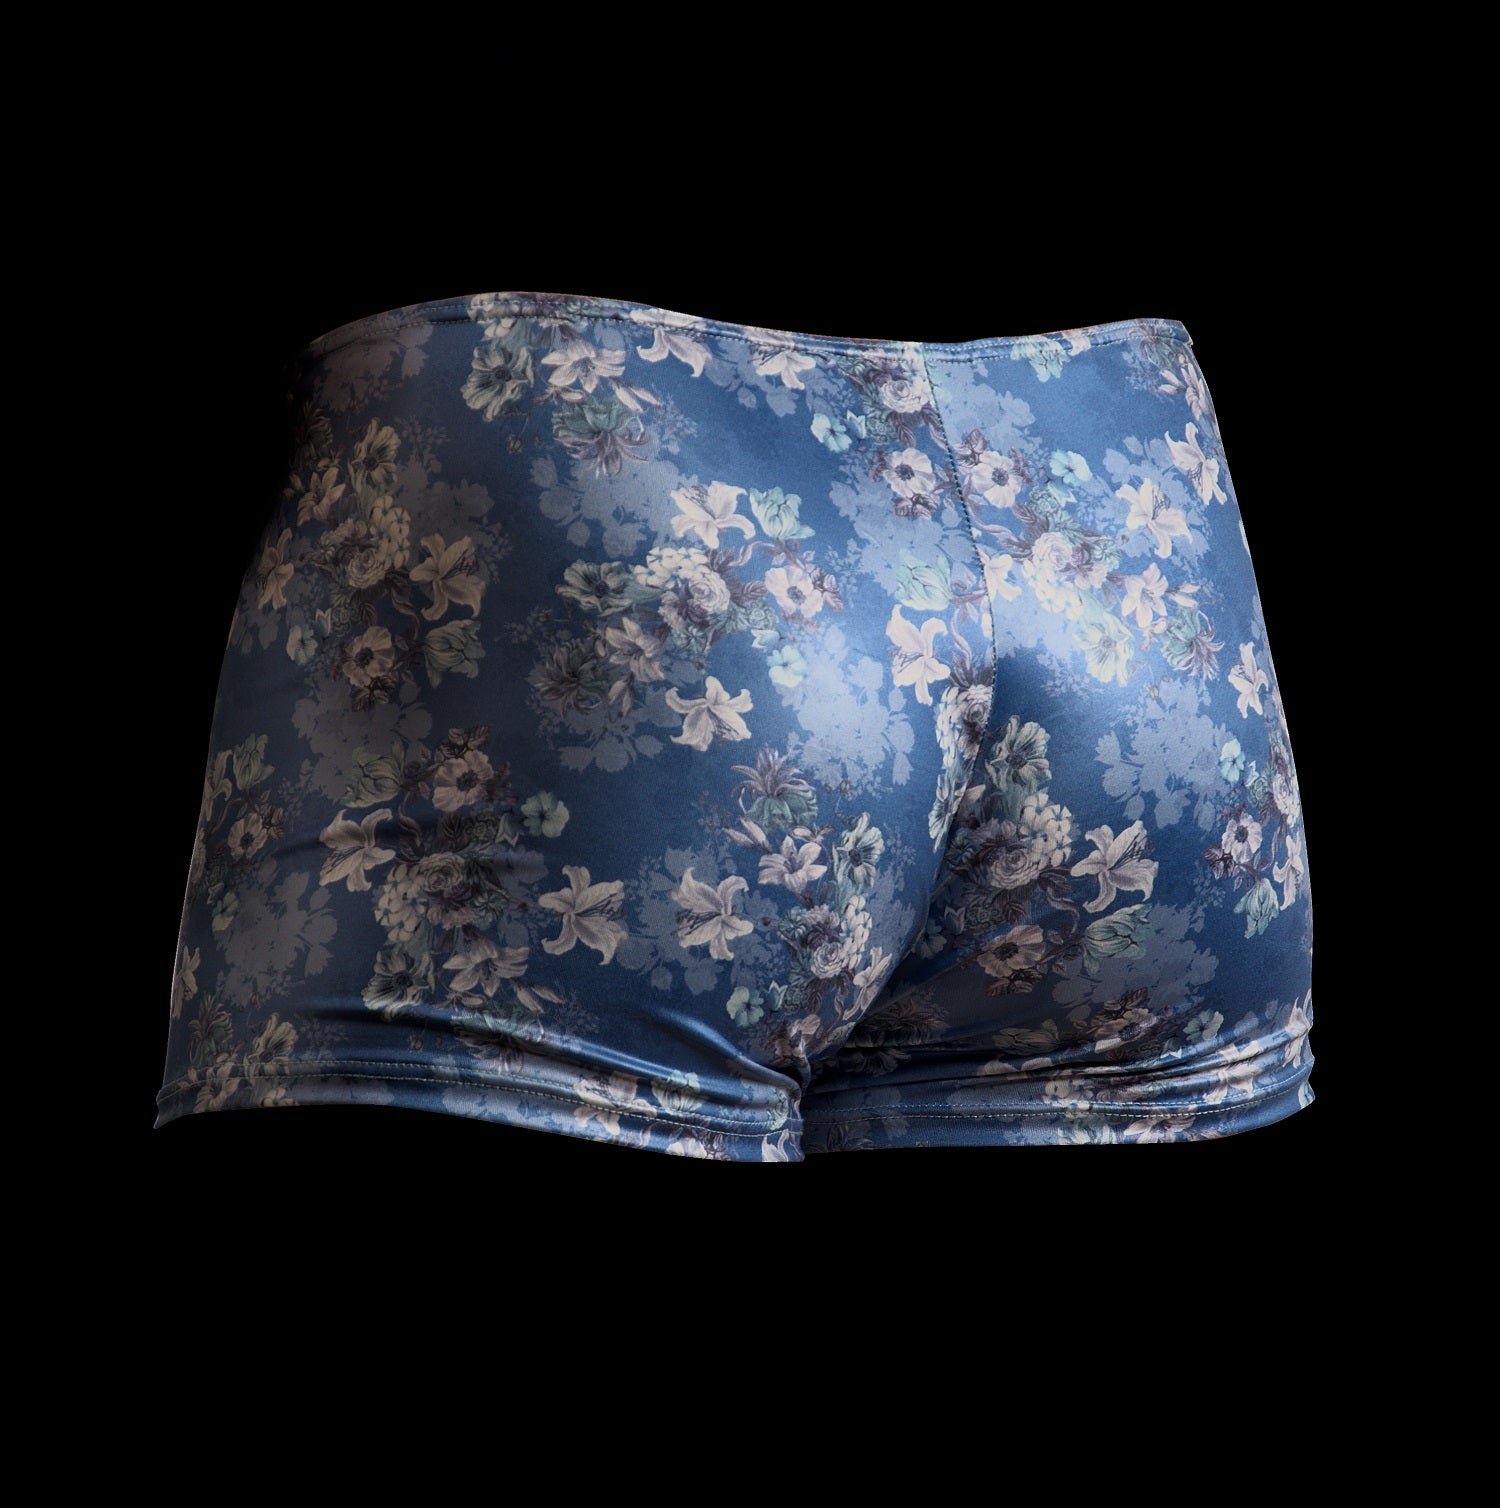 The Etseo Nature Reflex Trunk Blue is part of the Etseo Nature Reflex men's underwear collection of Trunks and Bikini Briefs. Etseo Nature Reflex is made with a very comfortable shiny and elastic fabric printed with modern floral patterns. At Etseo we manufacture quality men's underwear.